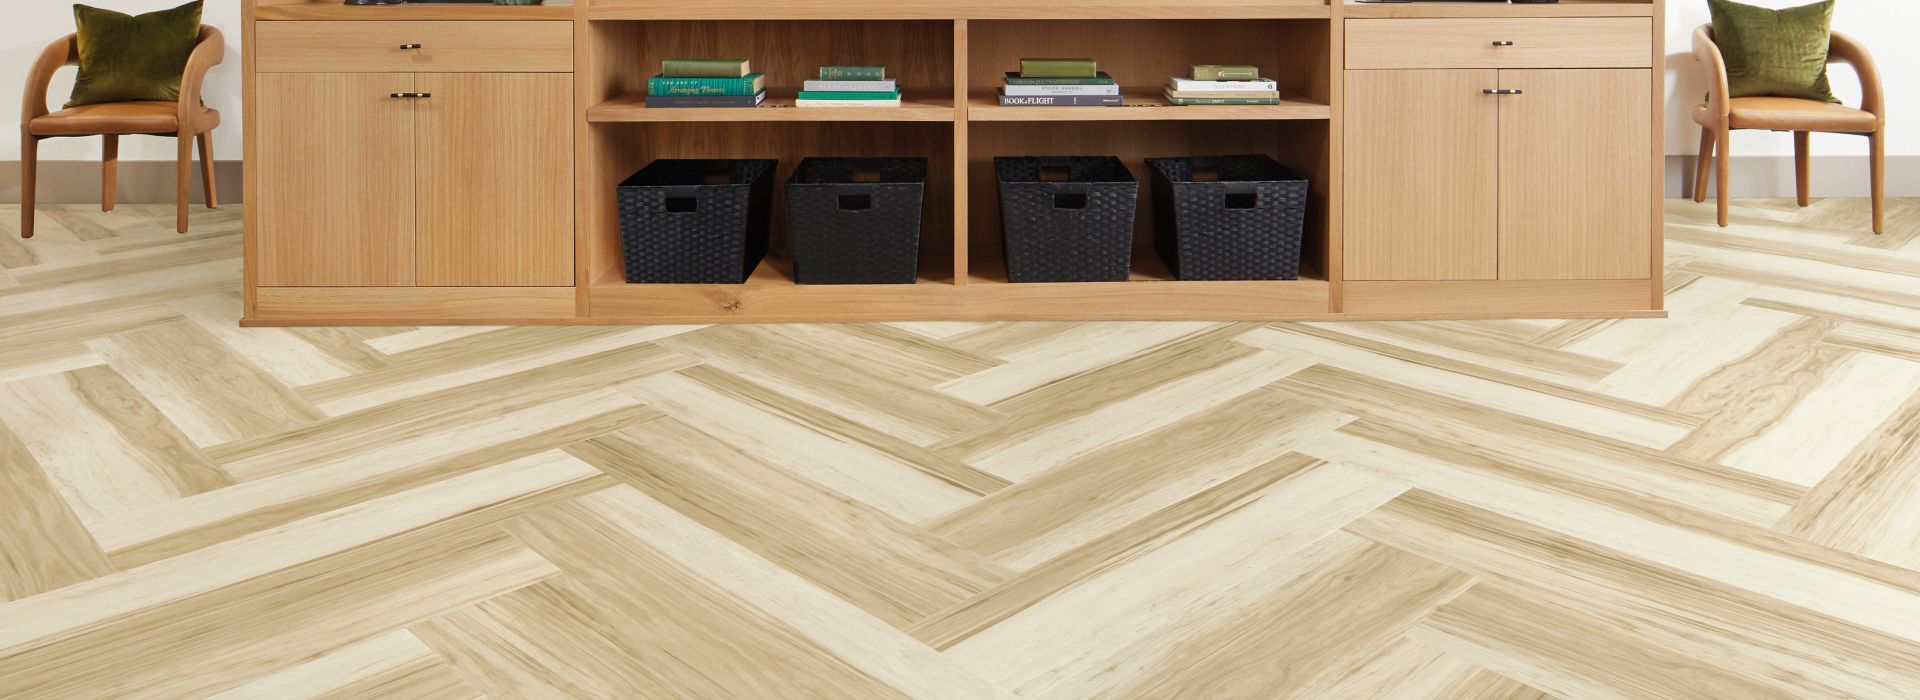 Interface Great Heights LVT in White Oak shown in a casual reception area imagen número 1